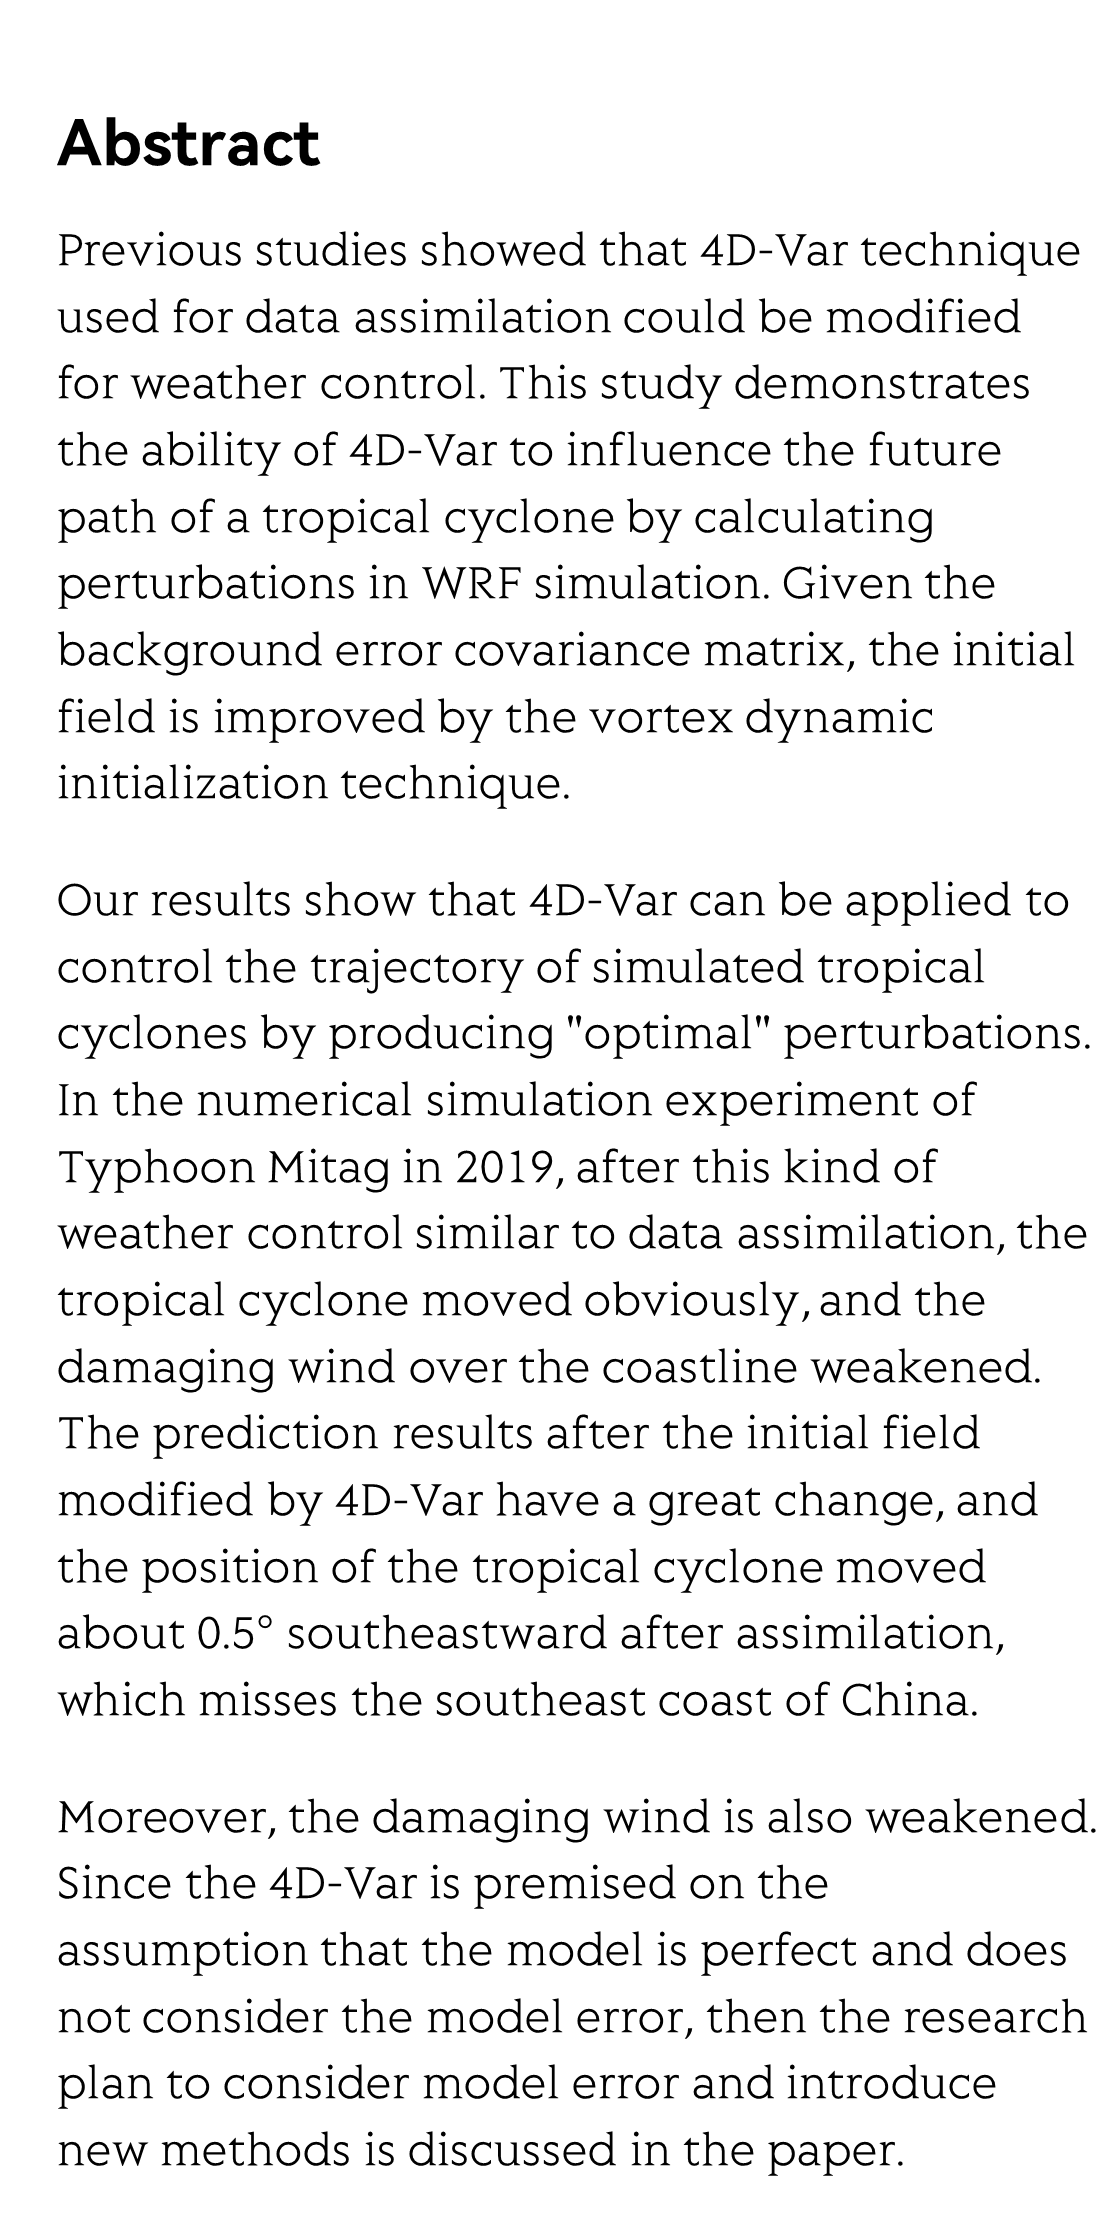 Move a Tropical Cyclone with 4D-Var and Vortex Dynamical Initialization in WRF Model_2